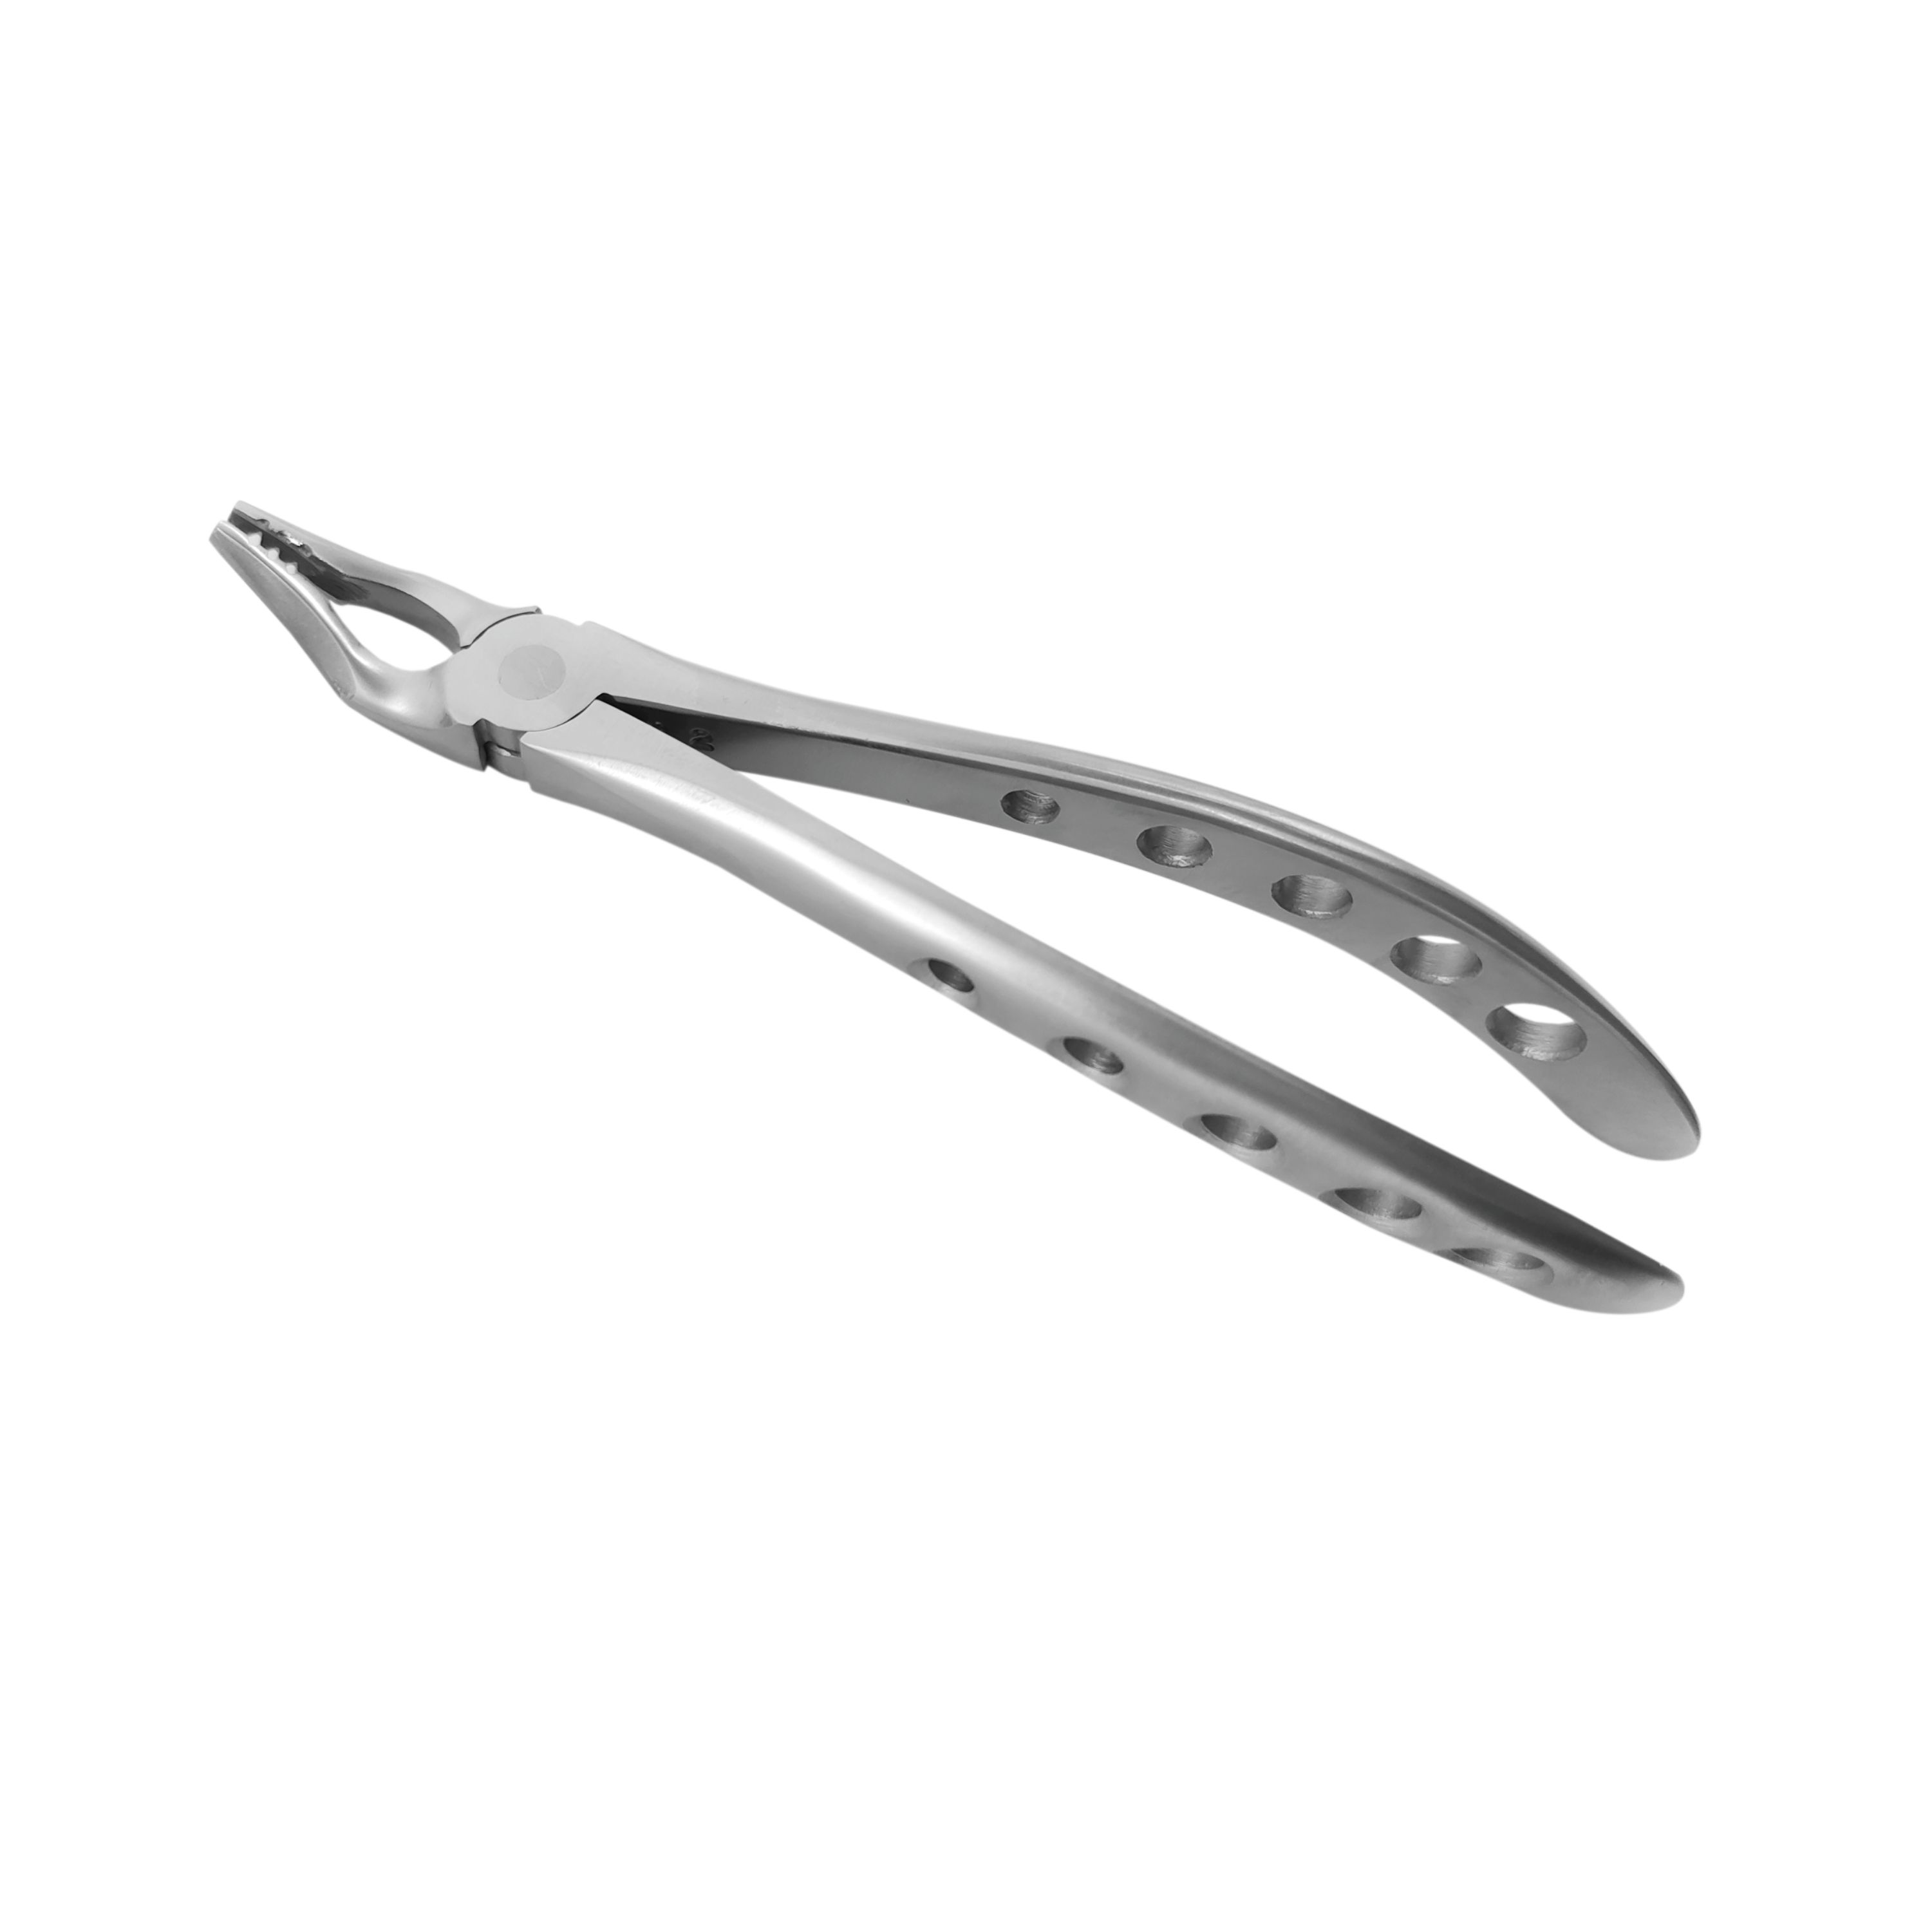 Trust & Care Deep Grip Extraction Forcep Upper Universal